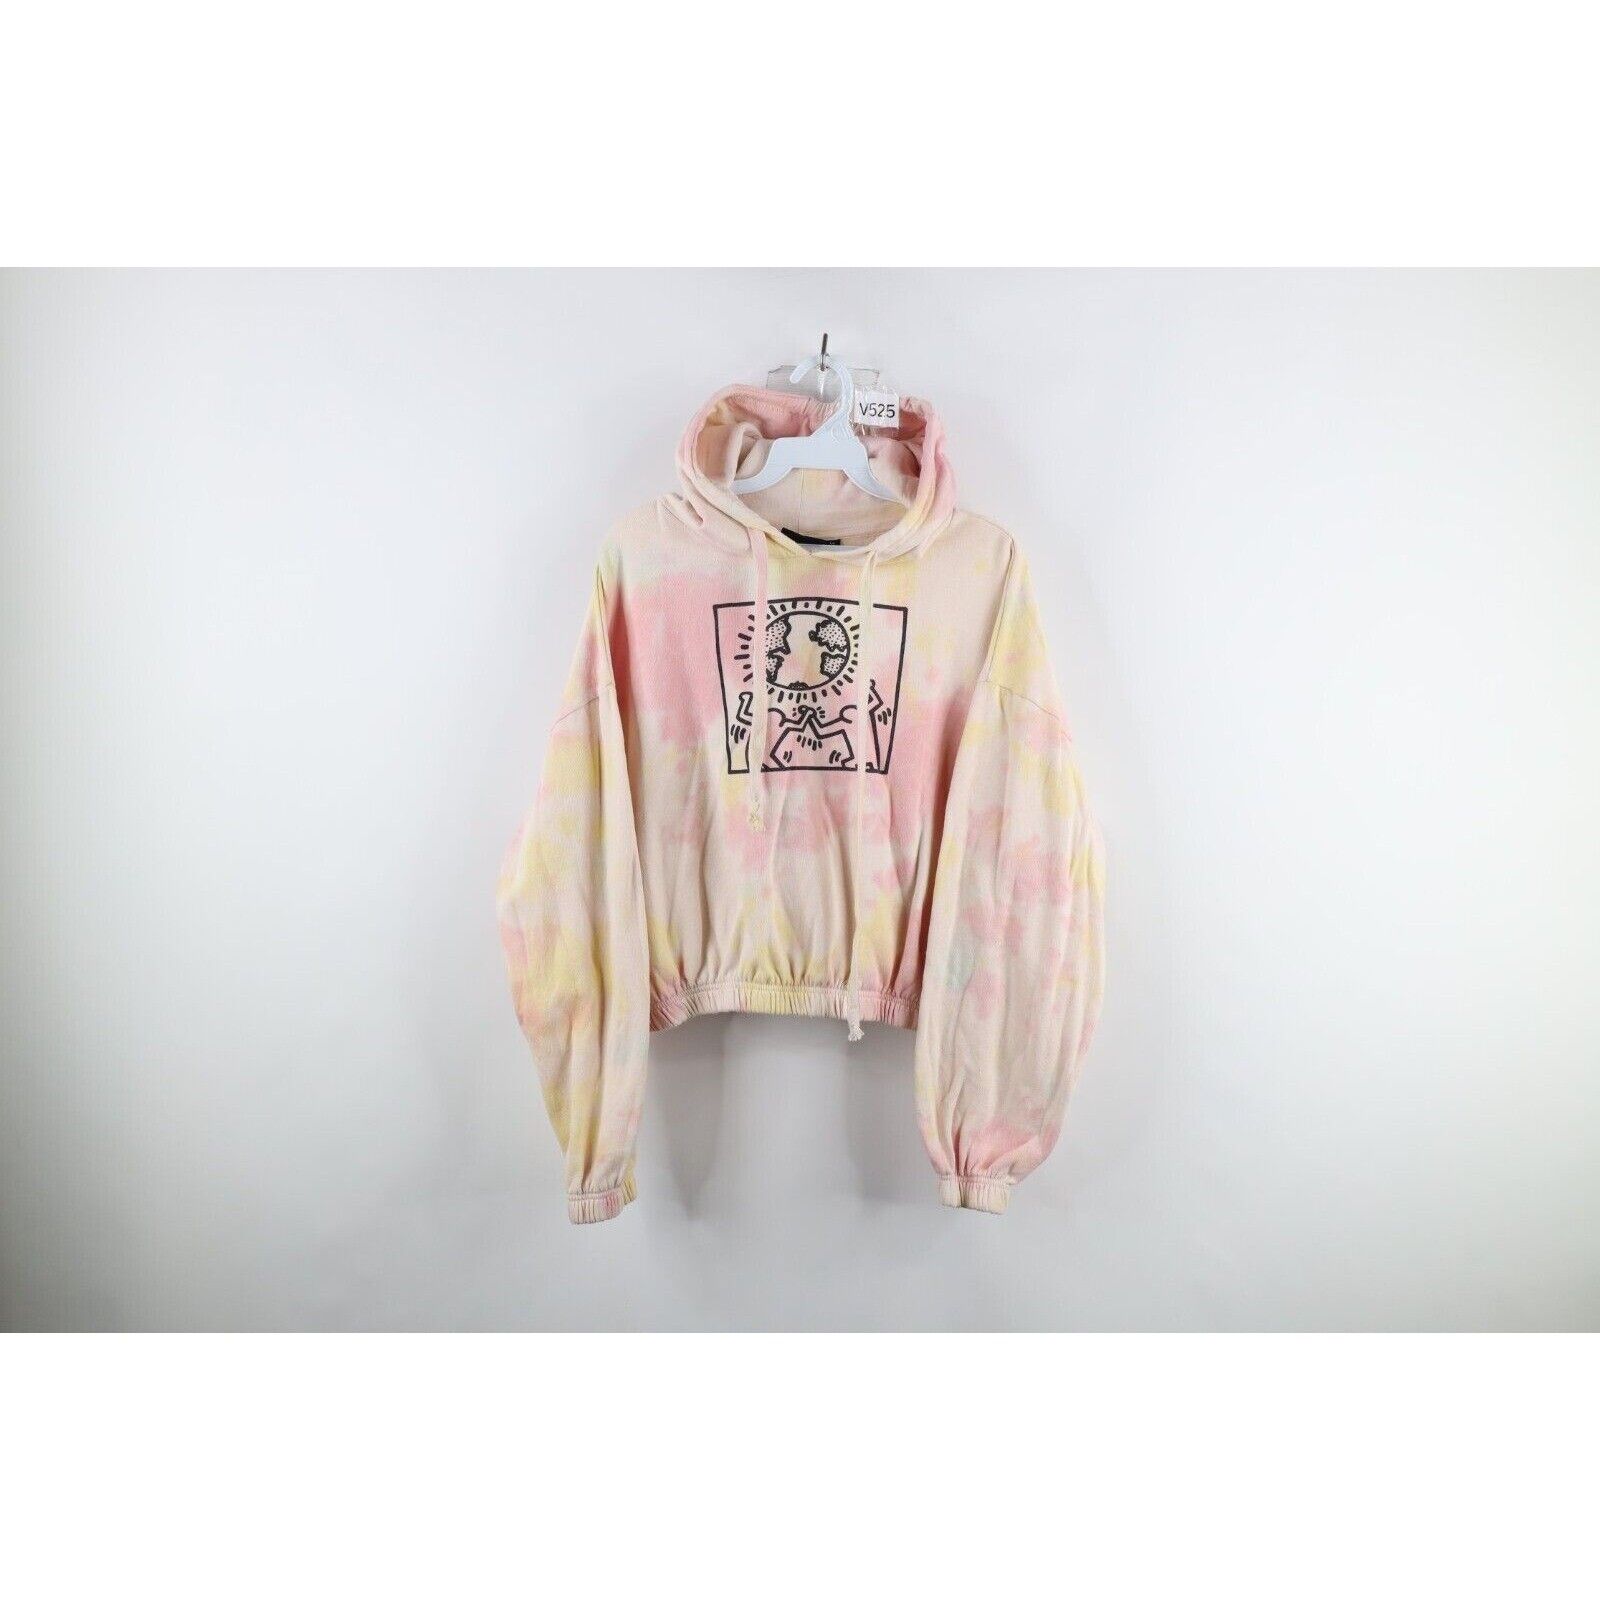 Vintage Retro Keith Haring Acid Wash Earth Day Art Cropped Hoodie Size L / US 10 / IT 46 - 1 Preview